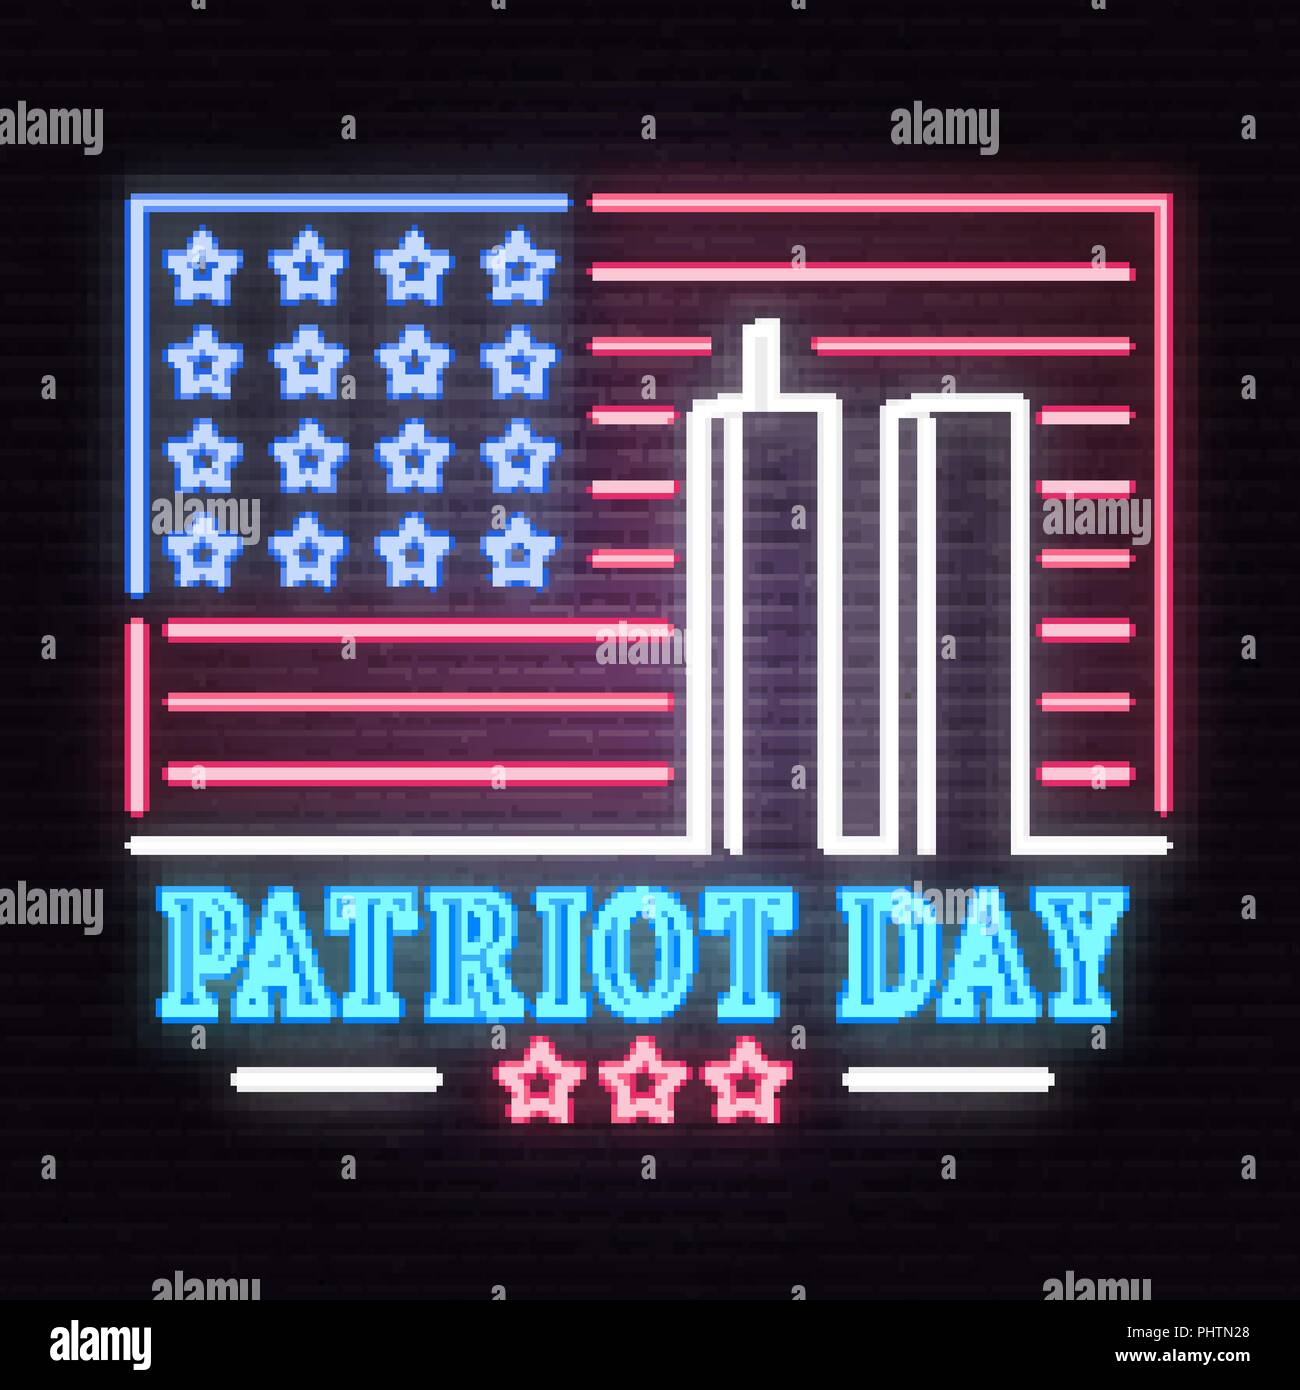 Patriot Day neon sign. We will never forget september 11, 2001. Patriotic banner or poster. Vector illustration for Patriot Day. Stock Vector